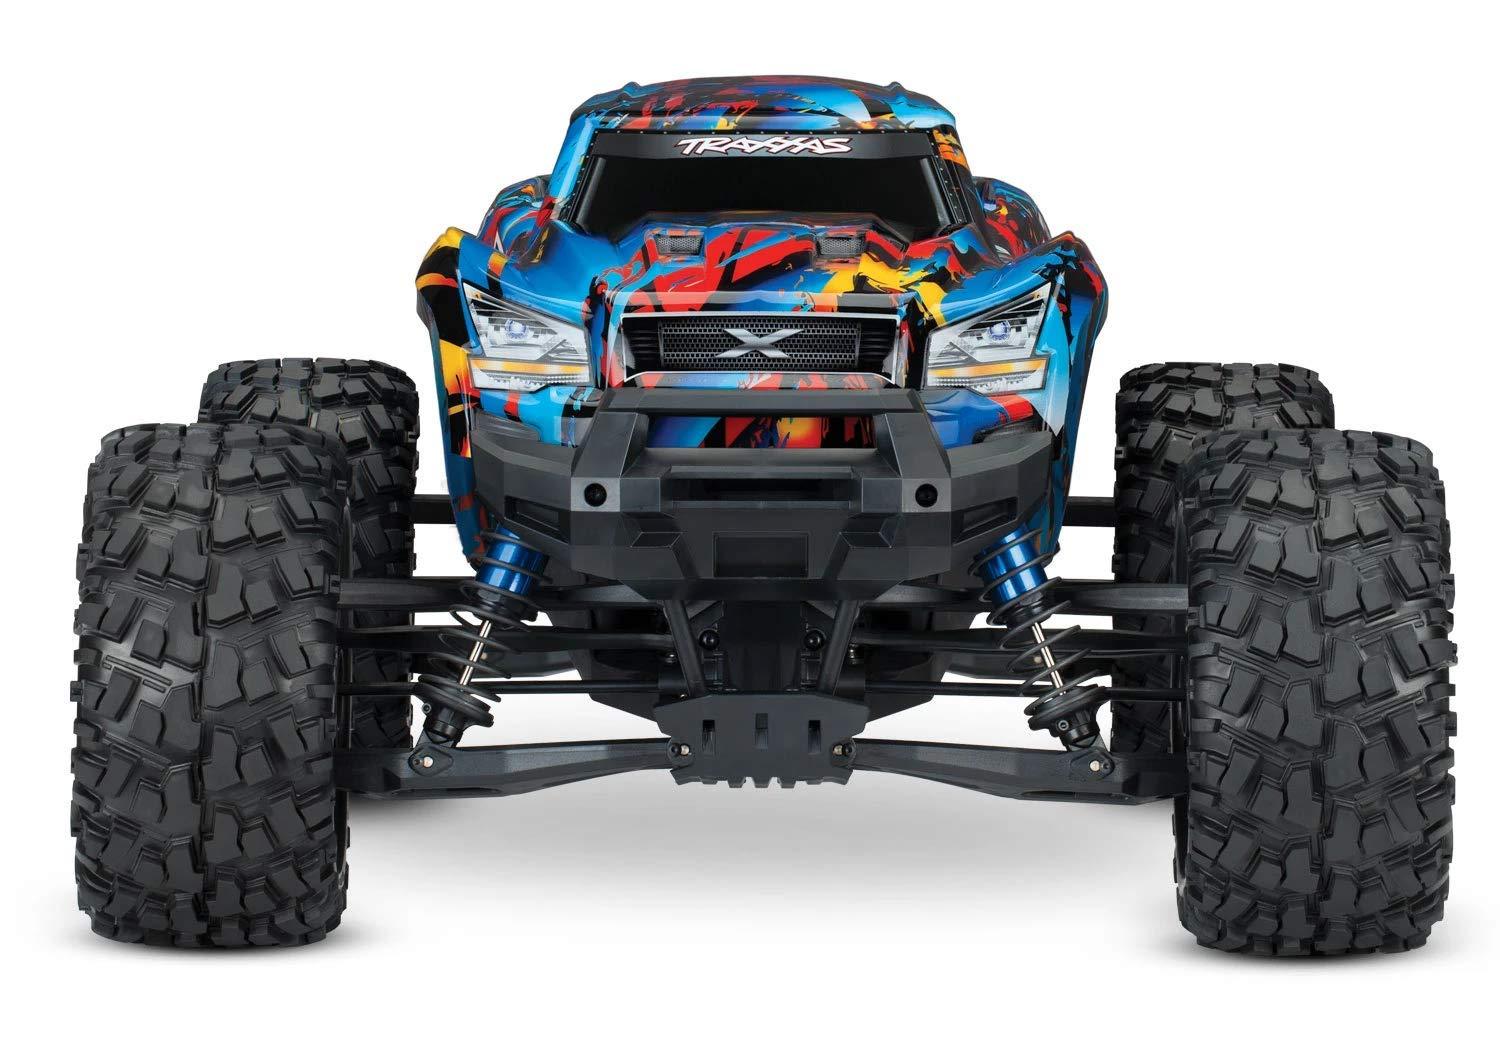 Most Powerful Rc Car: Powerhouse Models: Traxxas X-Maxx, Arrma Infraction, and Losi LMT Grave Digger